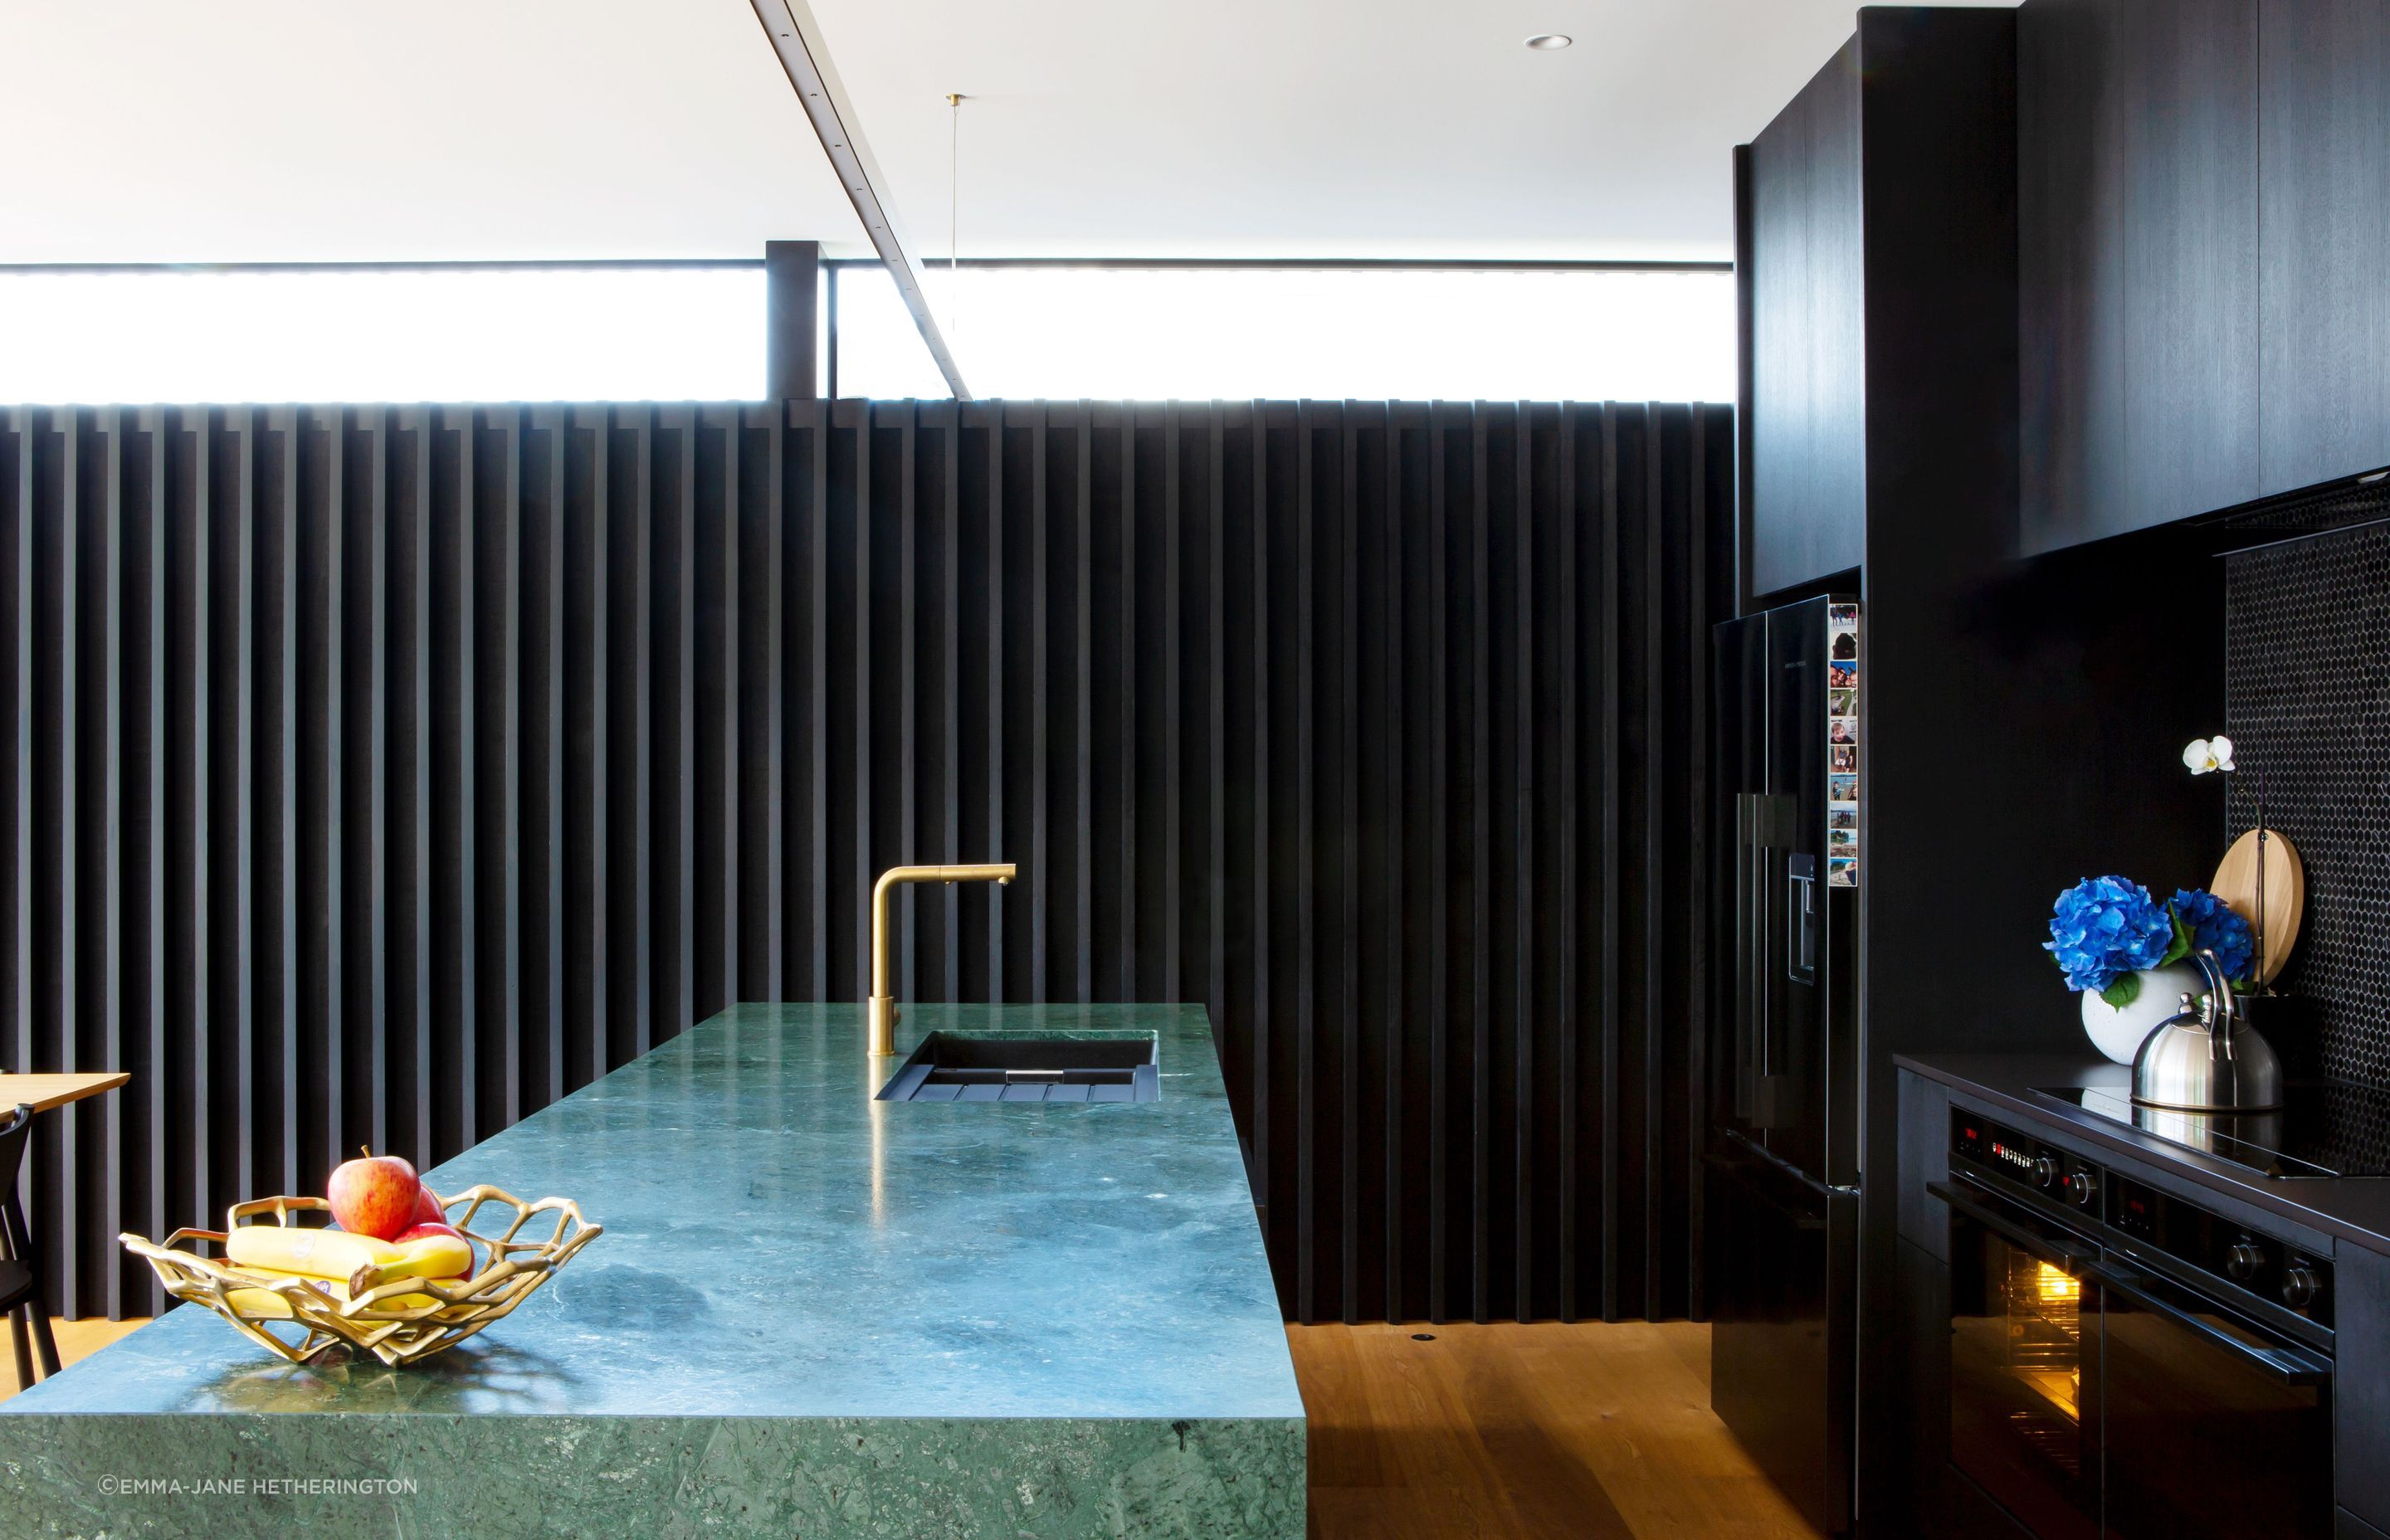 The Buddy mixer is from Plumbline and the appliances are Fisher &amp; Paykel. Dorrington Atcheson Architects project architect Sam Lennon first suggested the green marble island even though previous clients had shied away from such a bold statement.